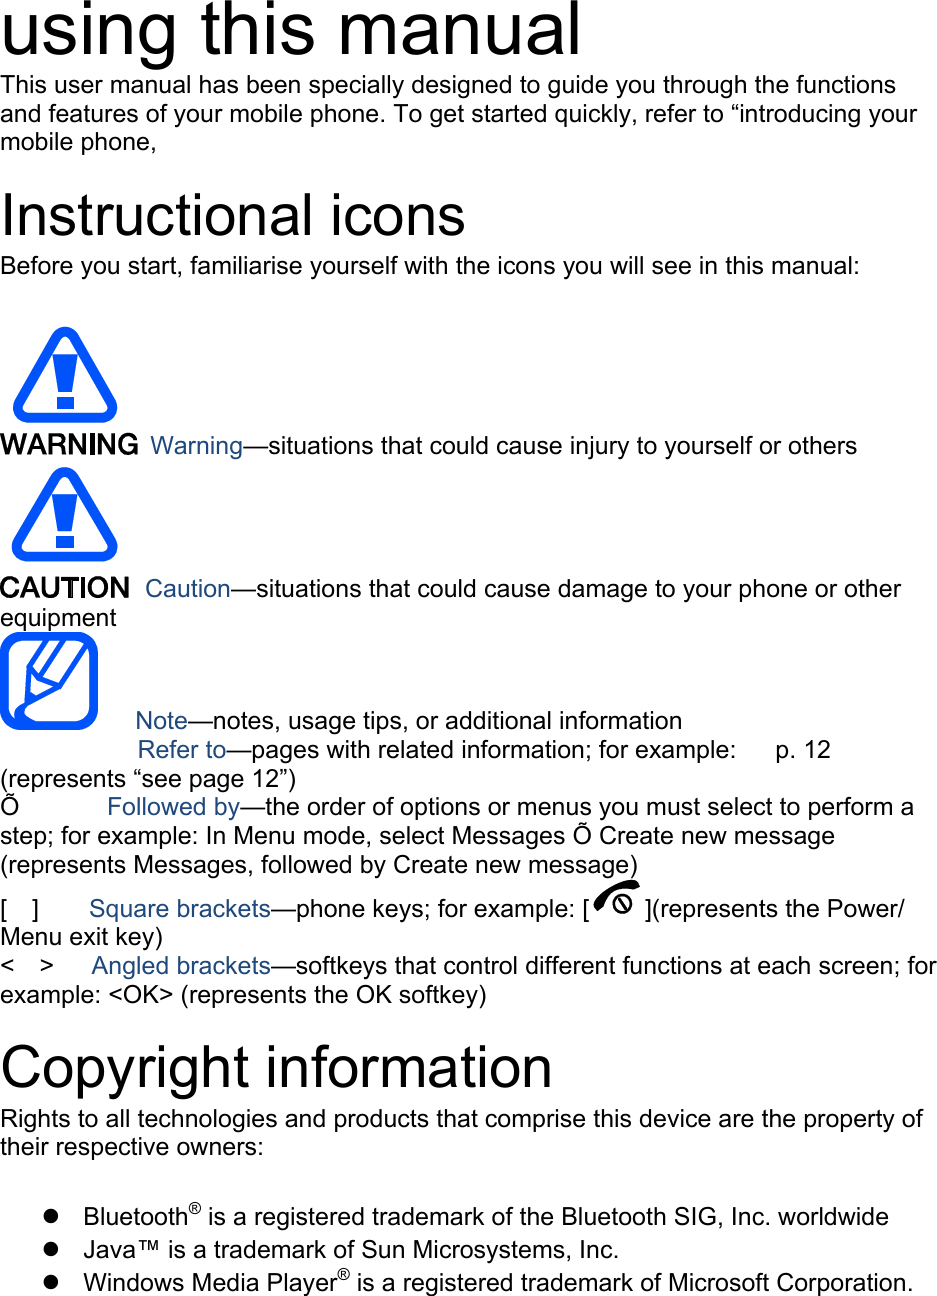 using this manual This user manual has been specially designed to guide you through the functions and features of your mobile phone. To get started quickly, refer to “introducing your mobile phone,  Instructional icons Before you start, familiarise yourself with the icons you will see in this manual:     Warning—situations that could cause injury to yourself or others  Caution—situations that could cause damage to your phone or other equipment    Note—notes, usage tips, or additional information   　       Refer to—pages with related information; for example:   p. 12 　(represents “see page 12”) Õ       Followed by—the order of options or menus you must select to perform a step; for example: In Menu mode, select Messages Õ Create new message (represents Messages, followed by Create new message) [  ]    Square brackets—phone keys; for example: [ ](represents the Power/ Menu exit key) &lt;  &gt;   Angled brackets—softkeys that control different functions at each screen; for example: &lt;OK&gt; (represents the OK softkey)  Copyright information Rights to all technologies and products that comprise this device are the property of their respective owners:   Bluetooth® is a registered trademark of the Bluetooth SIG, Inc. worldwide   Java™ is a trademark of Sun Microsystems, Inc.  Windows Media Player® is a registered trademark of Microsoft Corporation.  